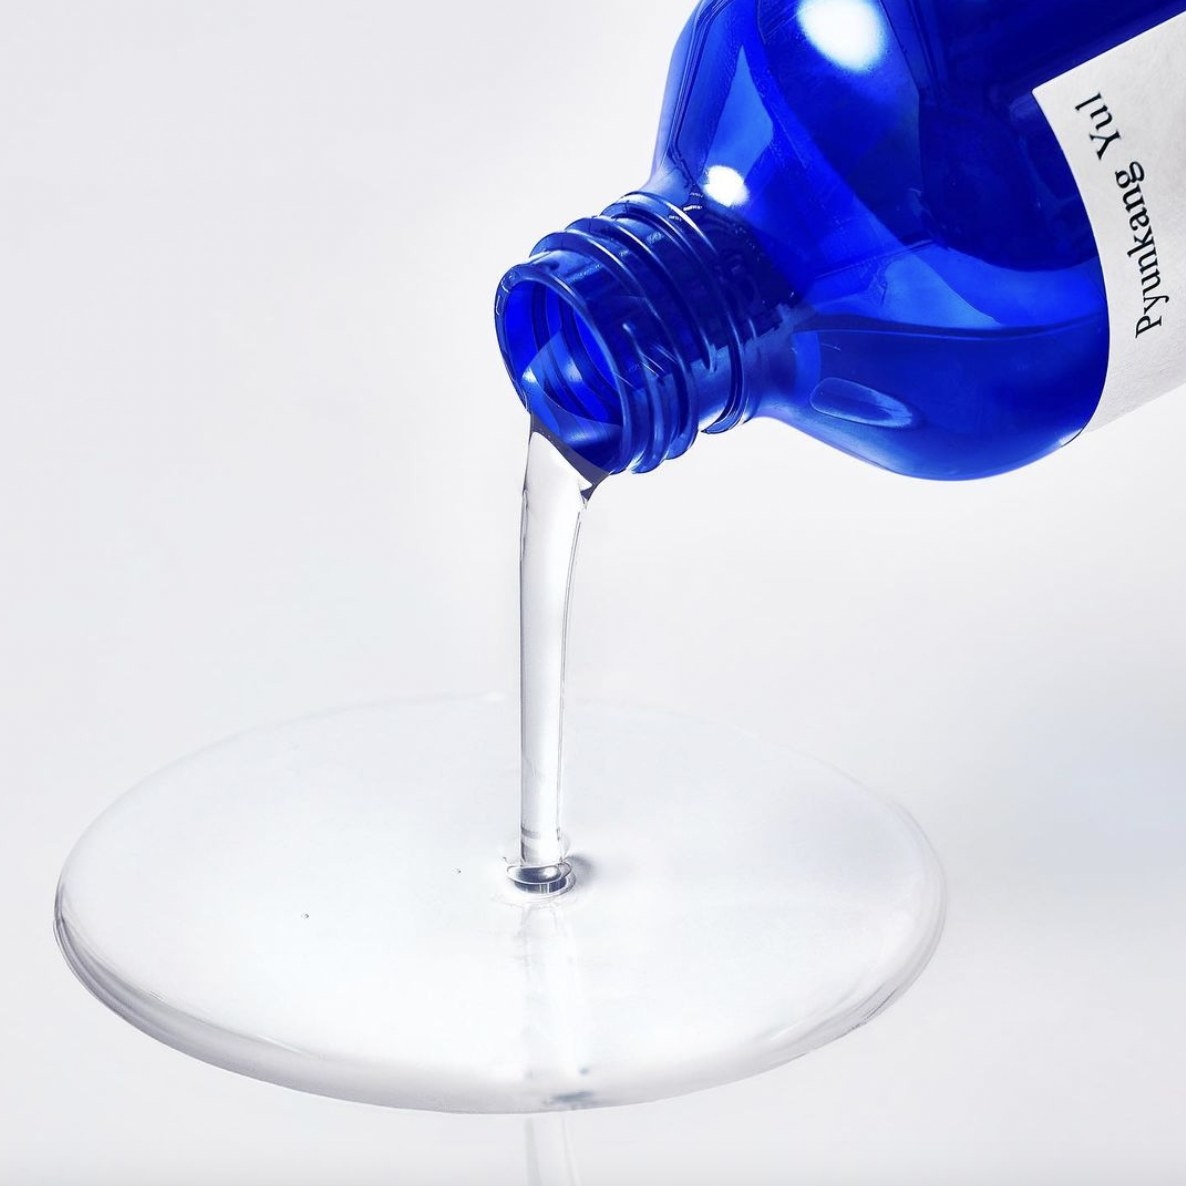 A bottle of toner being poured out